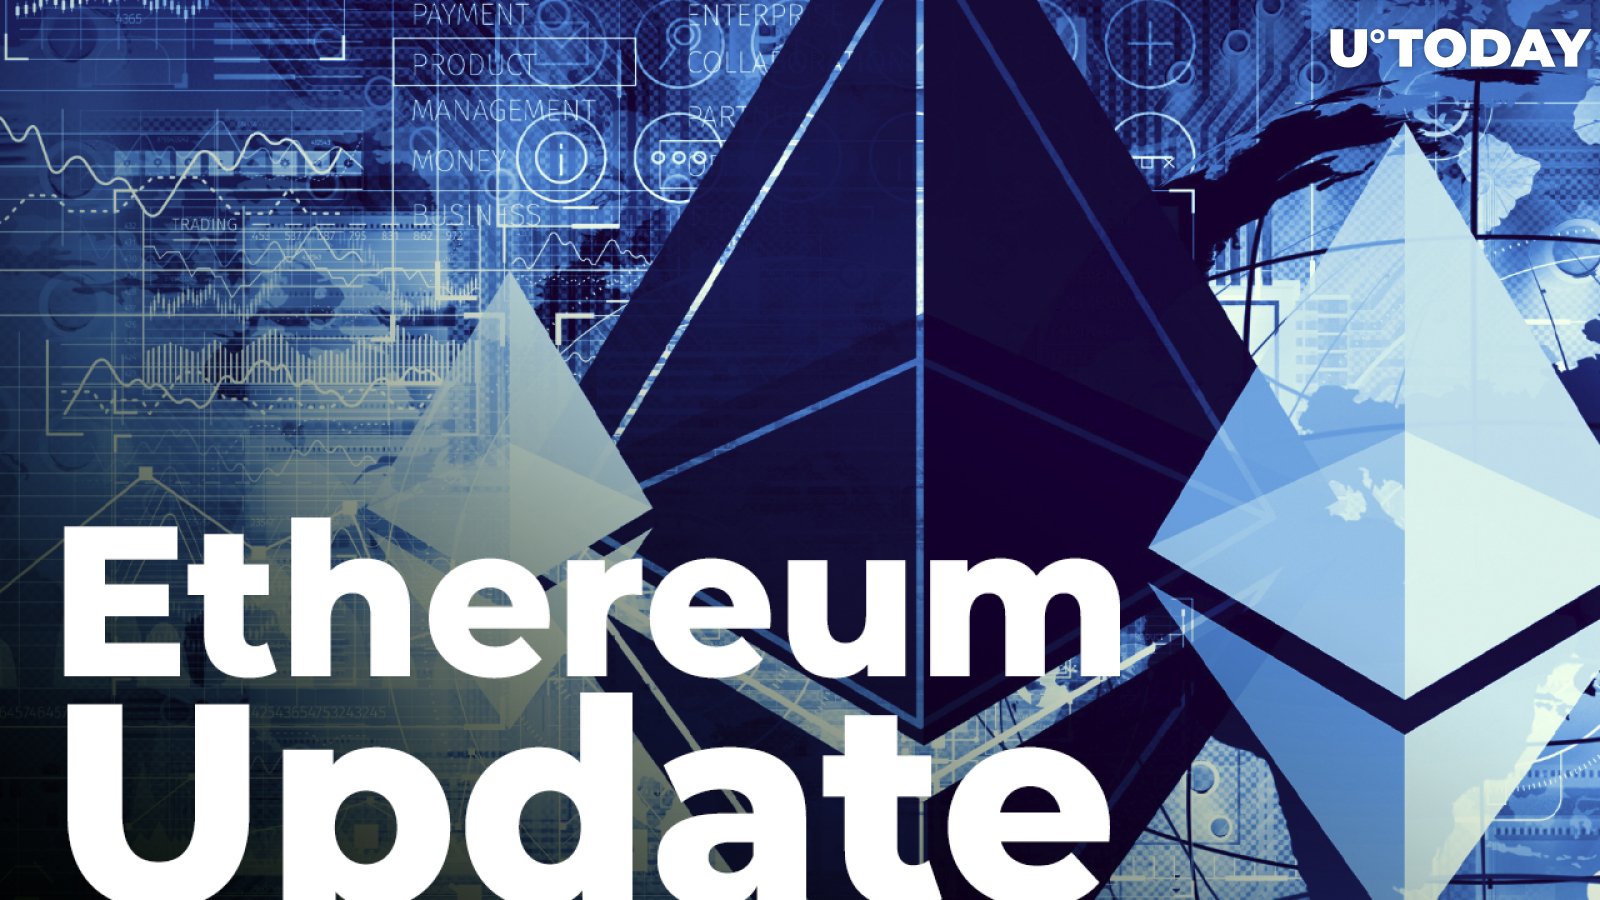 This New Ethereum Update to Go Live in Approximately 24 Hours, Here's What's Inside